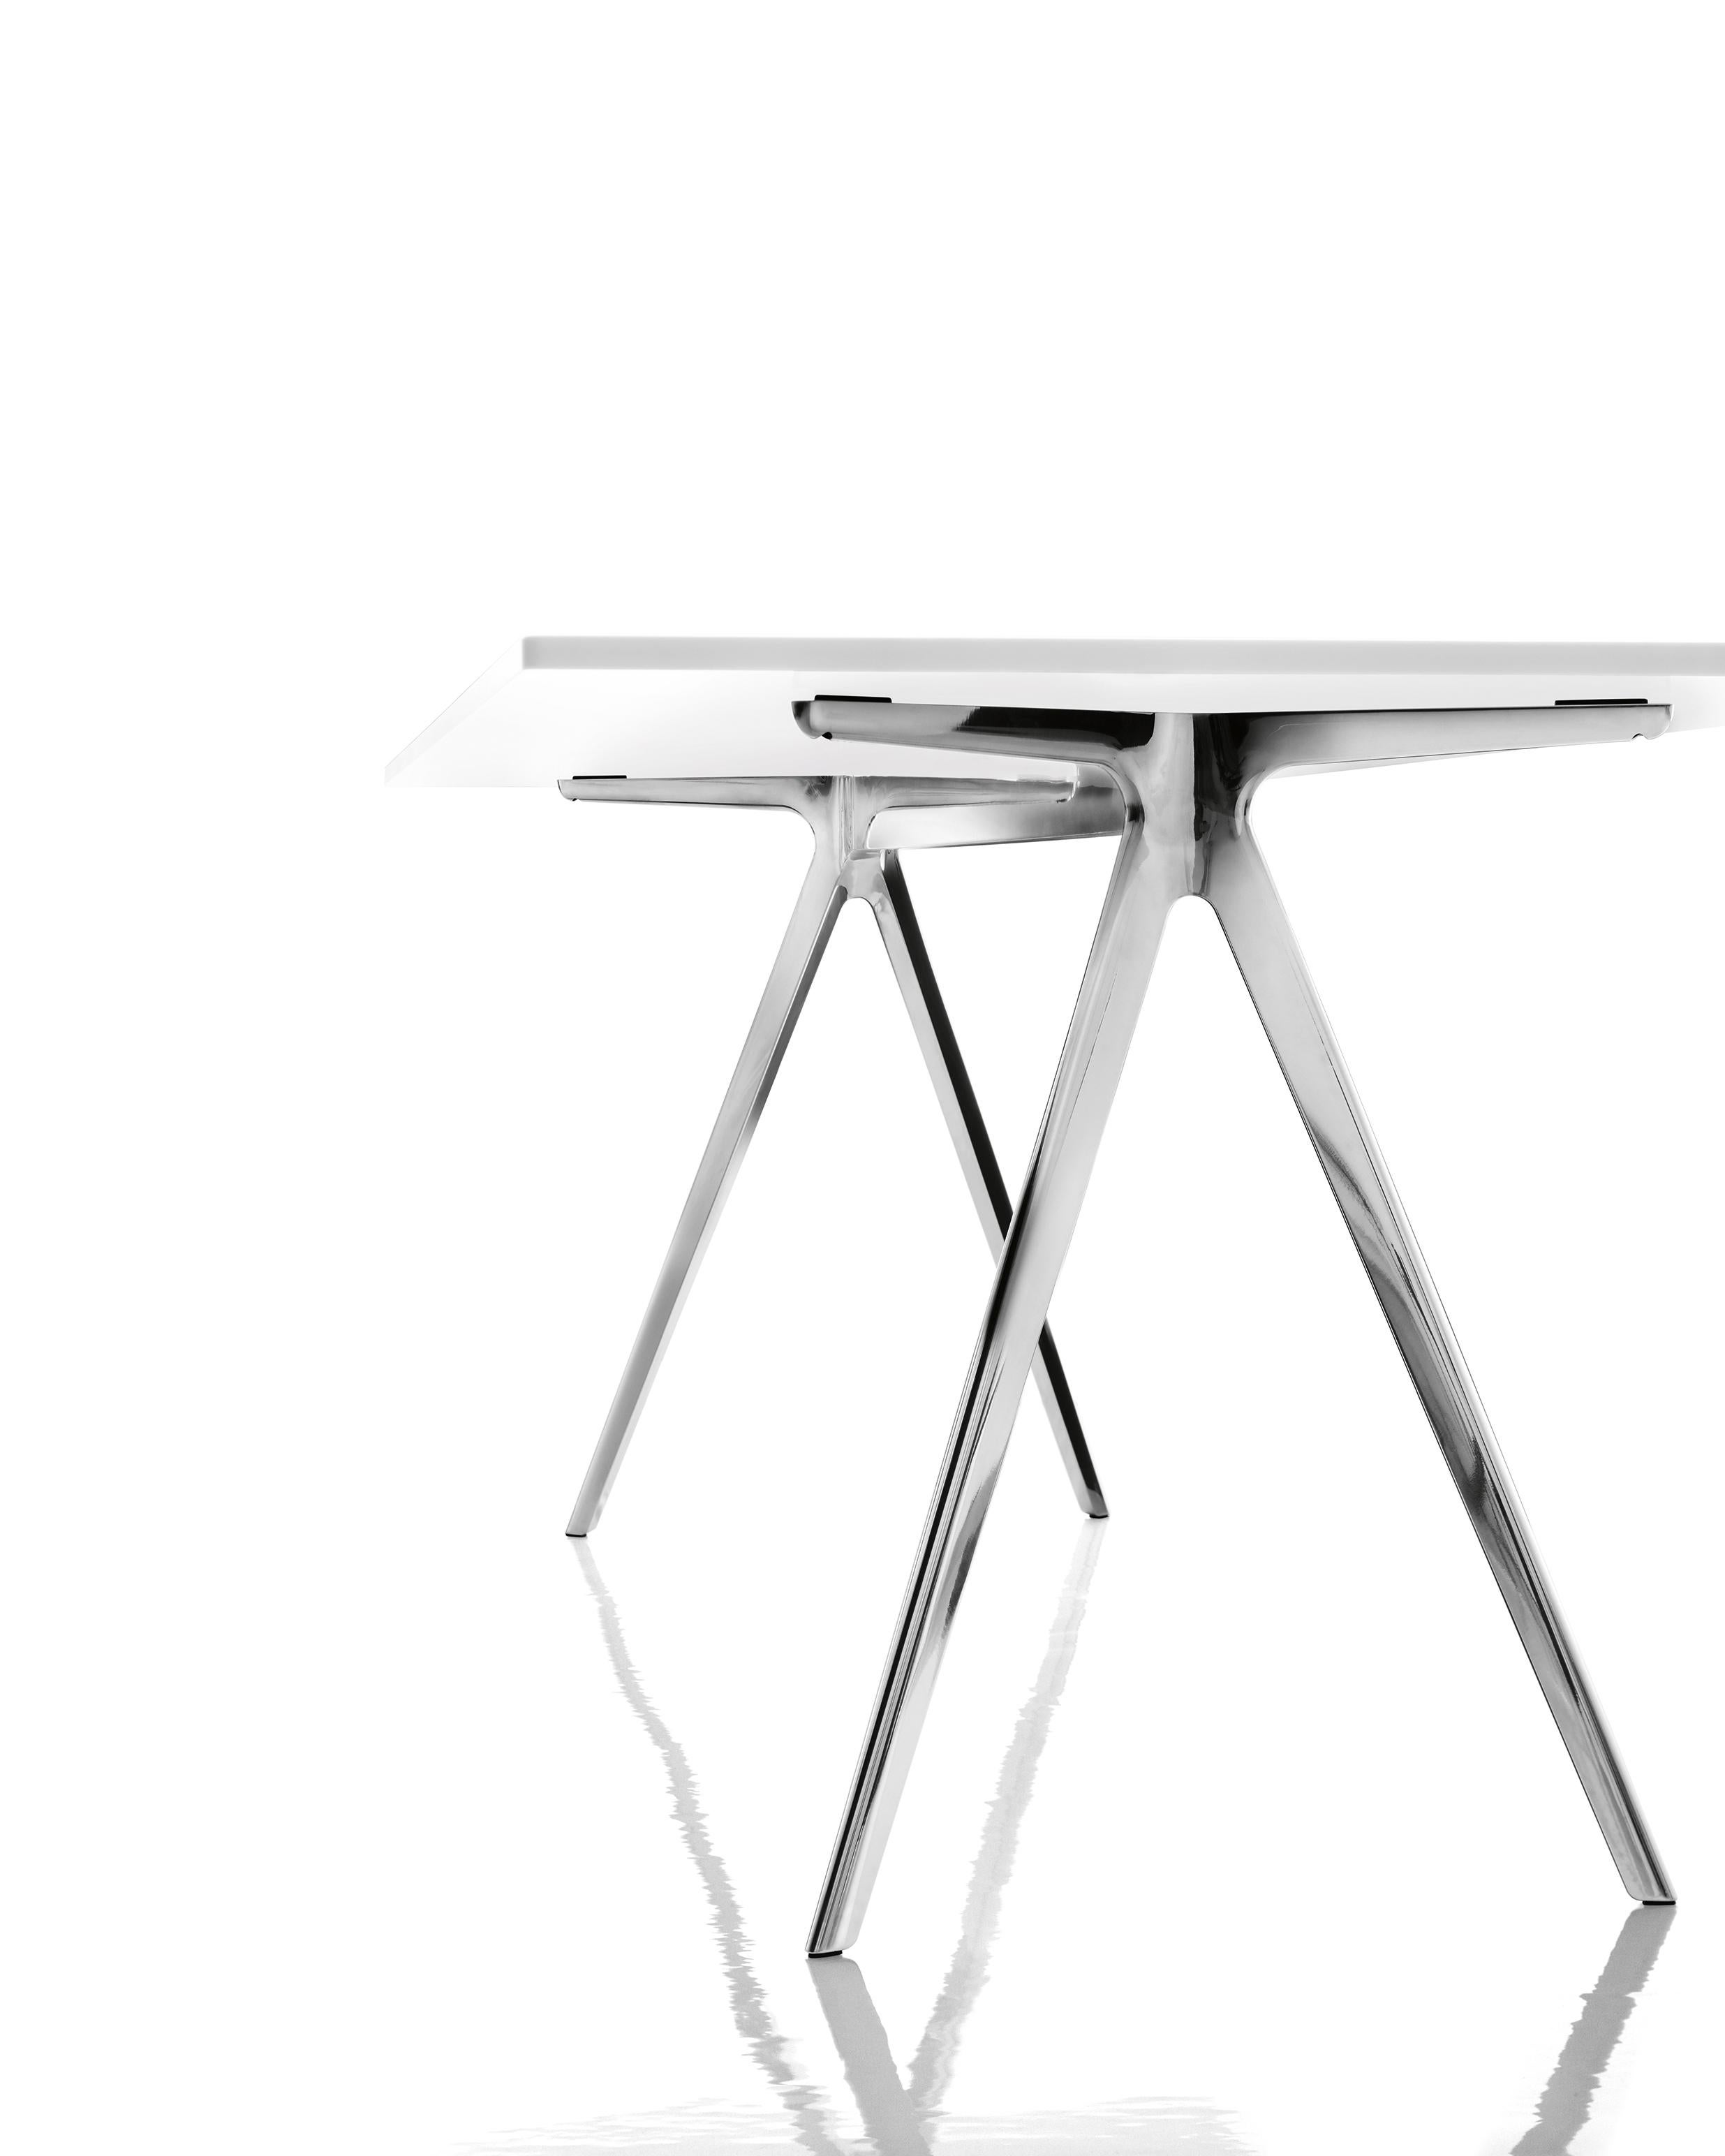 Baguette Table in Oak Top and White Frame by Ronan & Erwan Boroullec for MAGIS For Sale 13